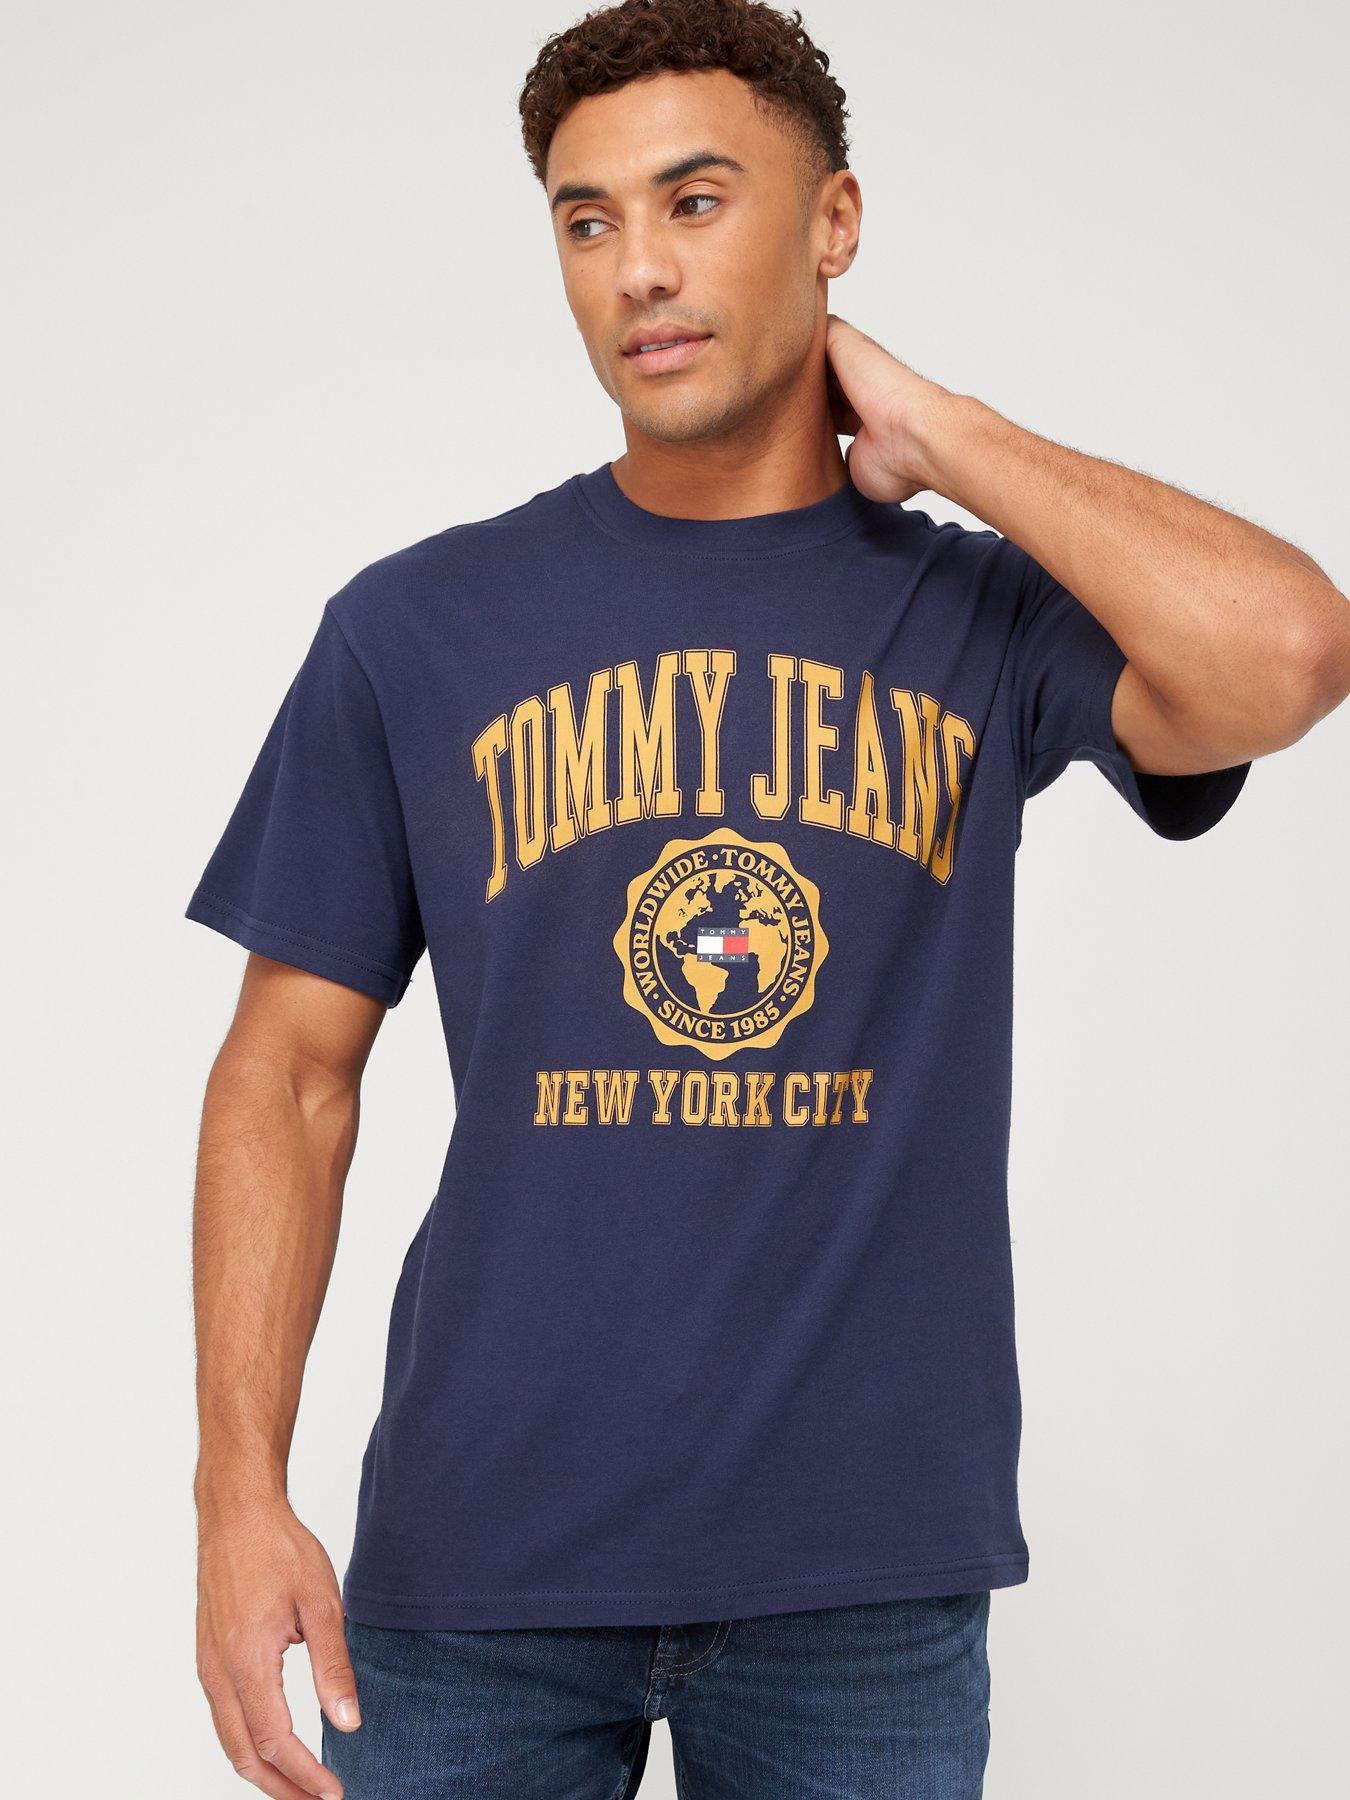 Huge Savings on | College Logo at Jeans Threads Tommy - Navy New Twilight T-Shirt Sale